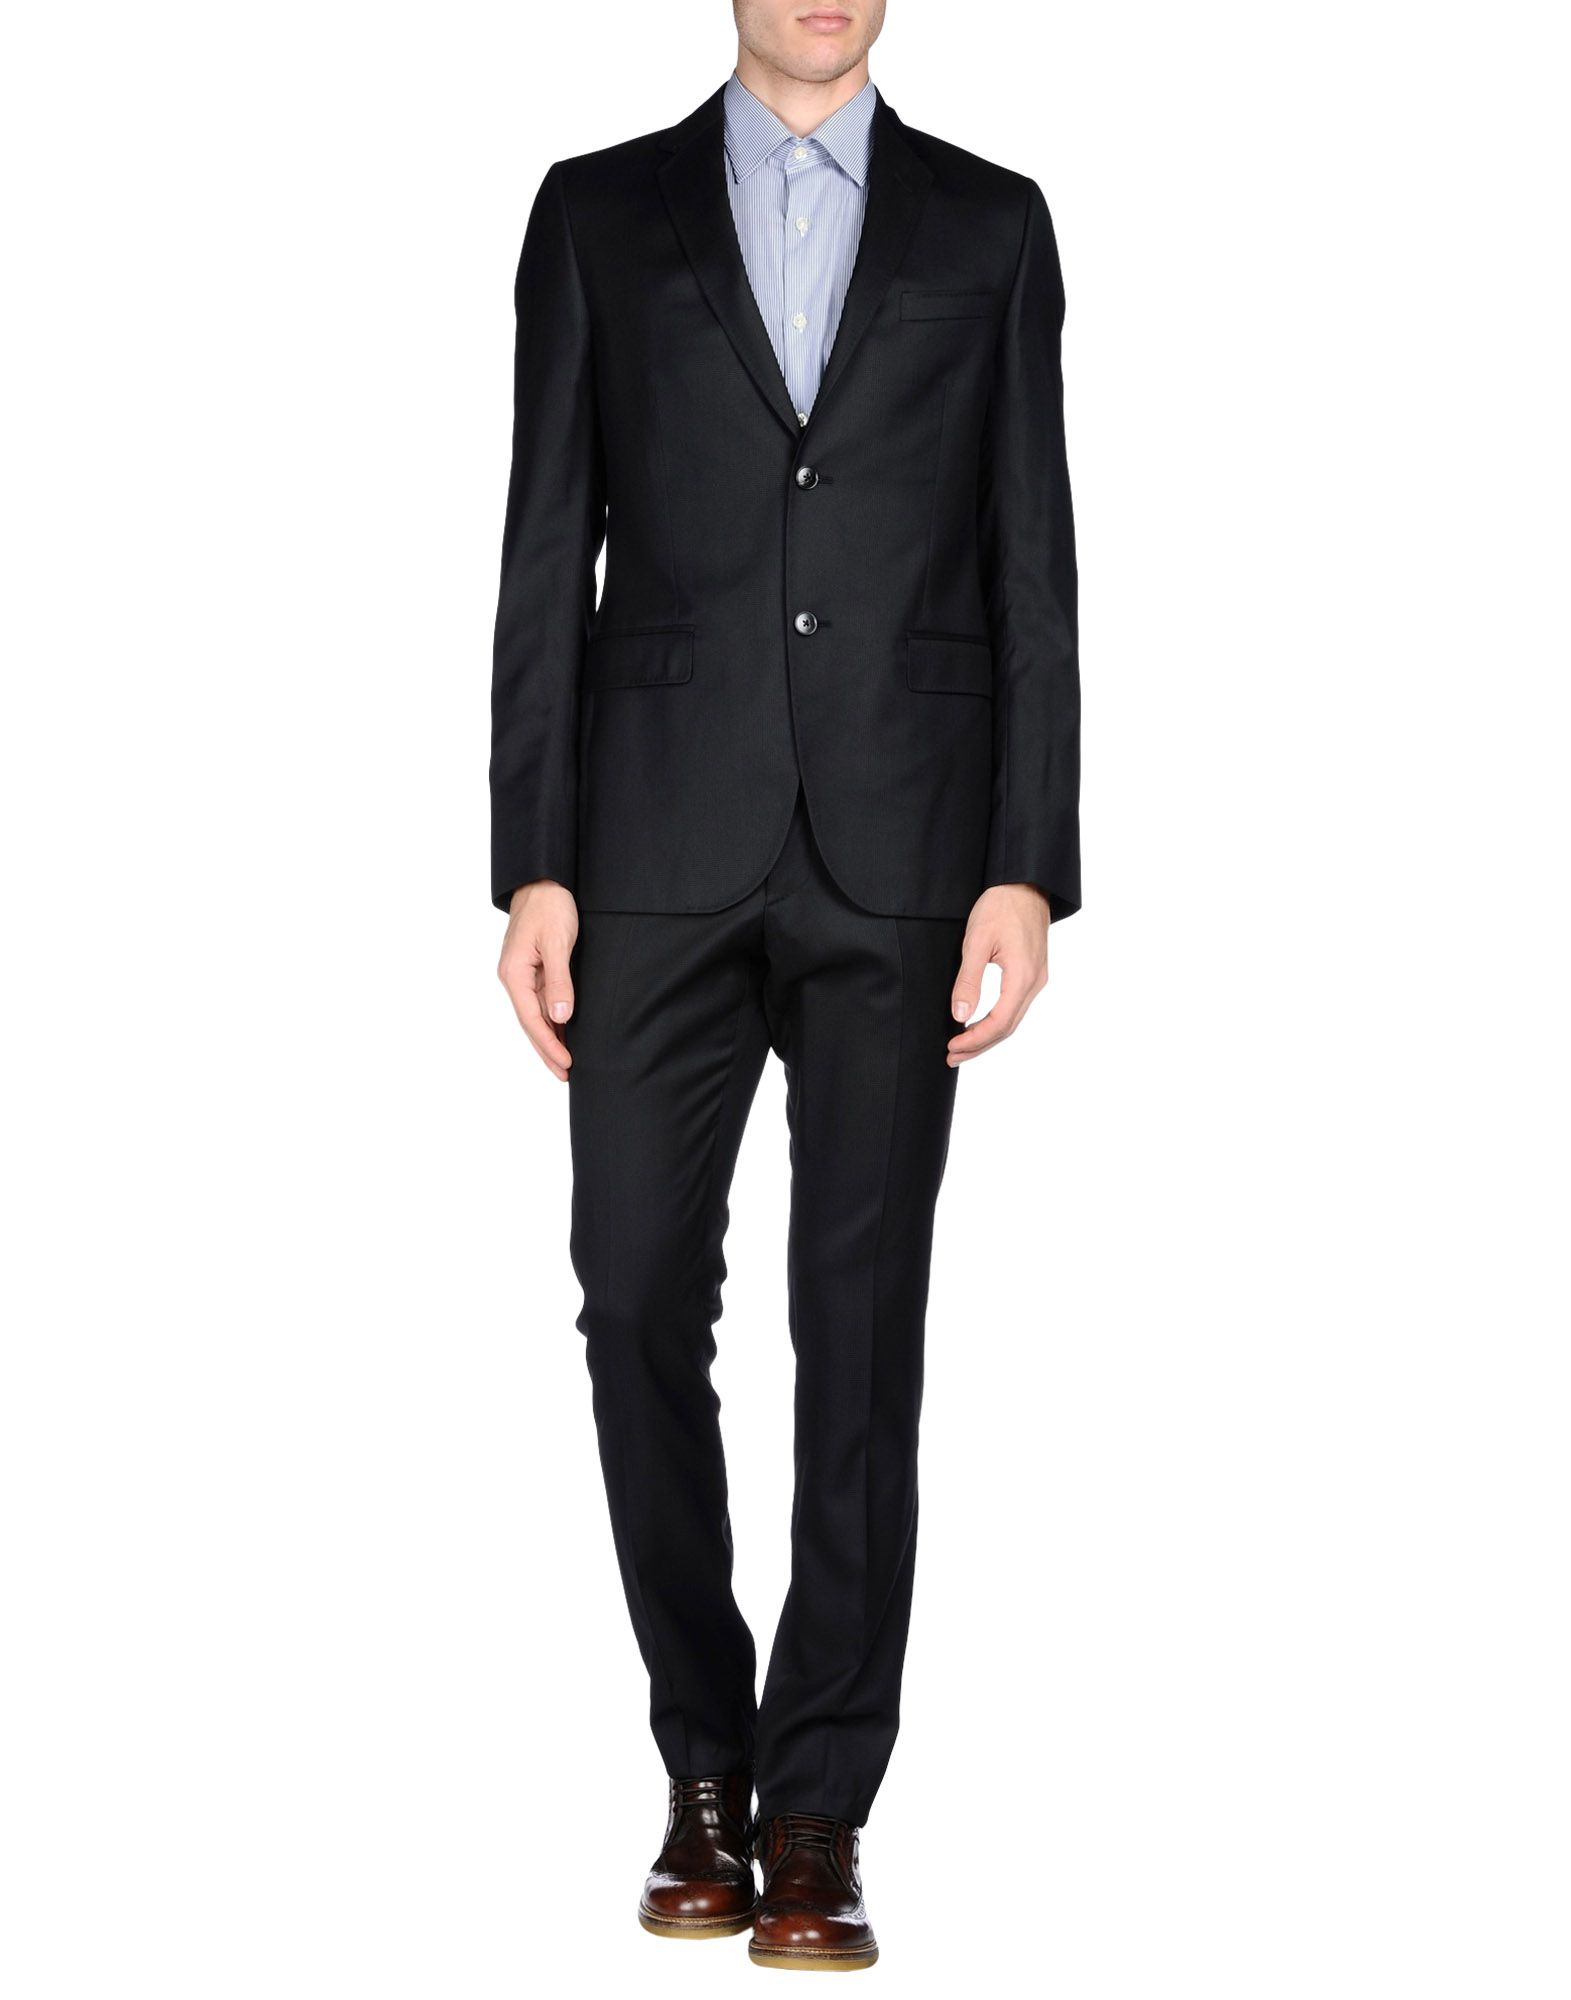 Lyst - Gucci Suit in Black for Men